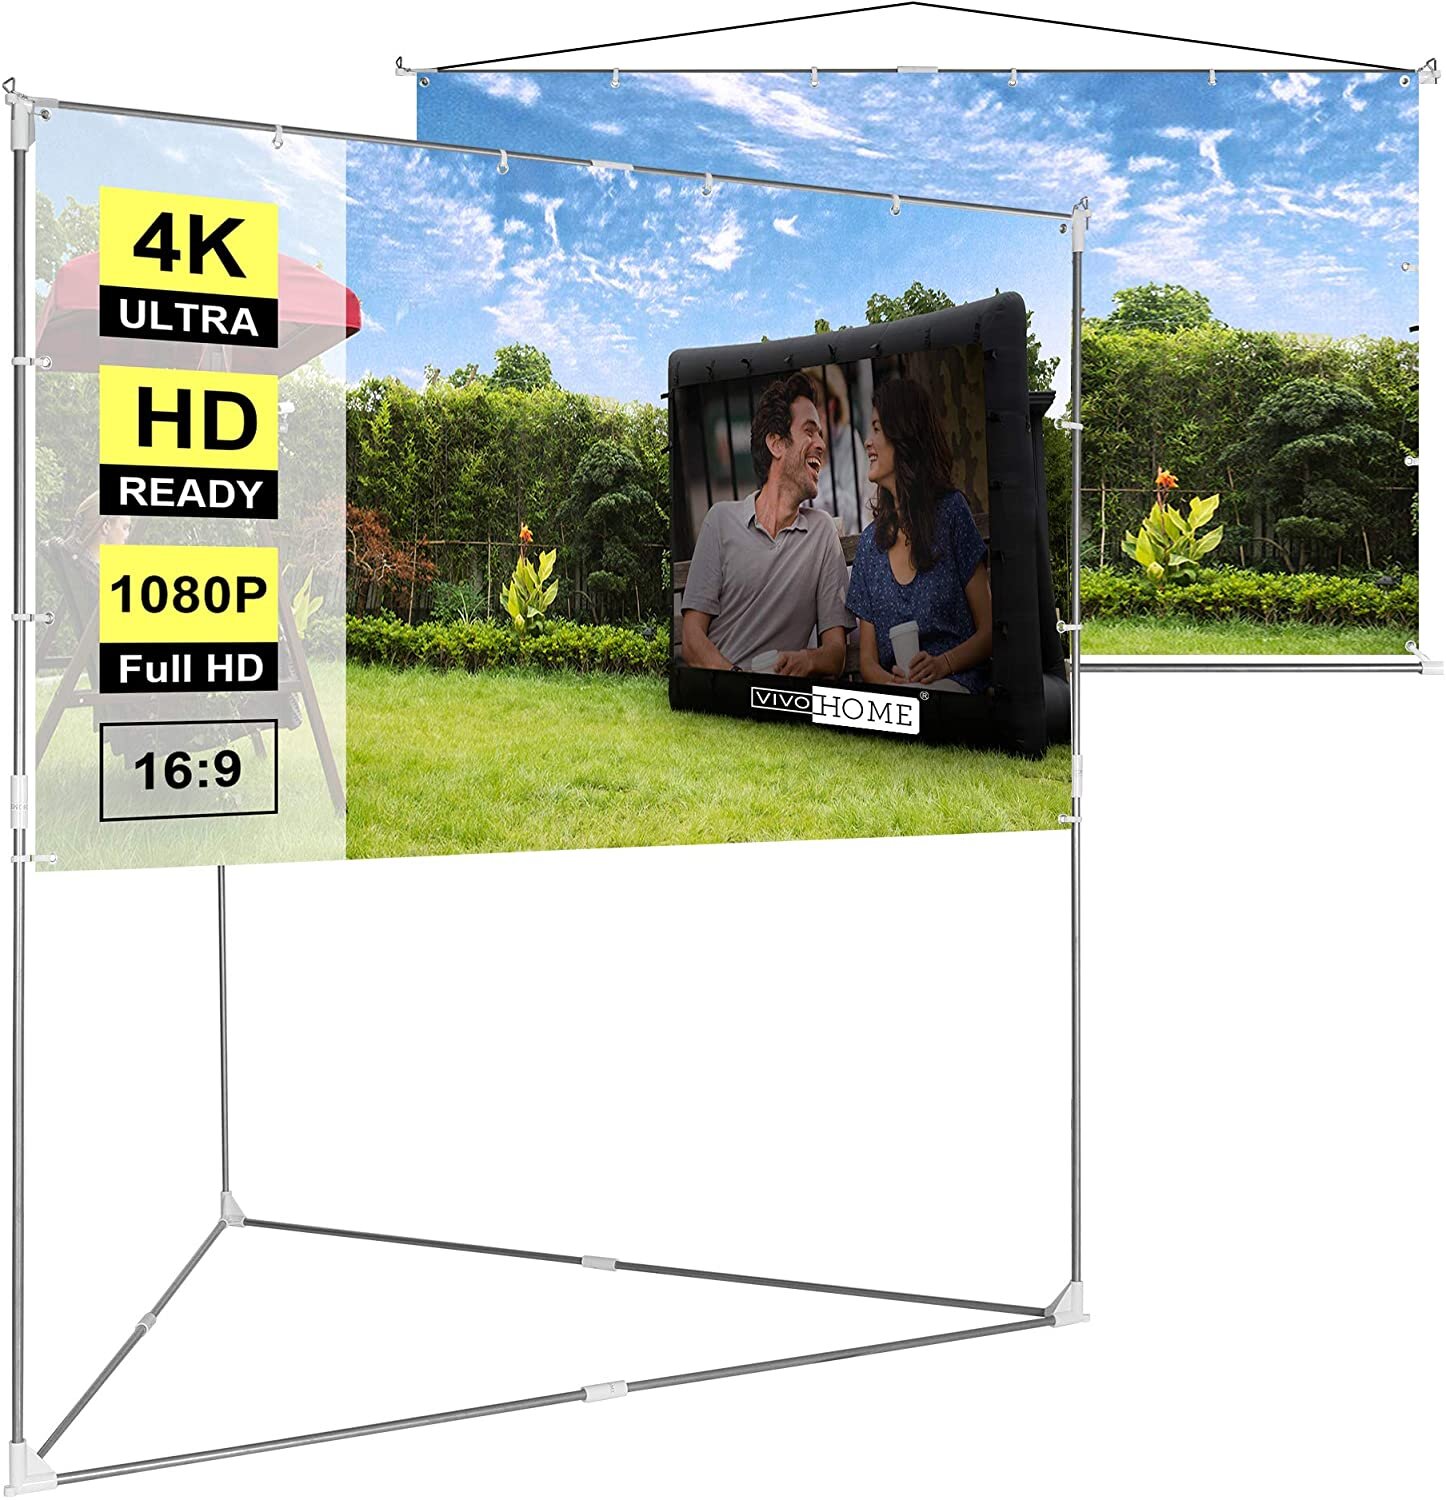 Anti-Crease Free of Punch Cleanable Traceless Double-Sided Indoor and Outdoor Projection Screen for Home,Party,Camping,Office Projector Screen 100 inch,16:9 4K Portable Foldable Movie Screen 